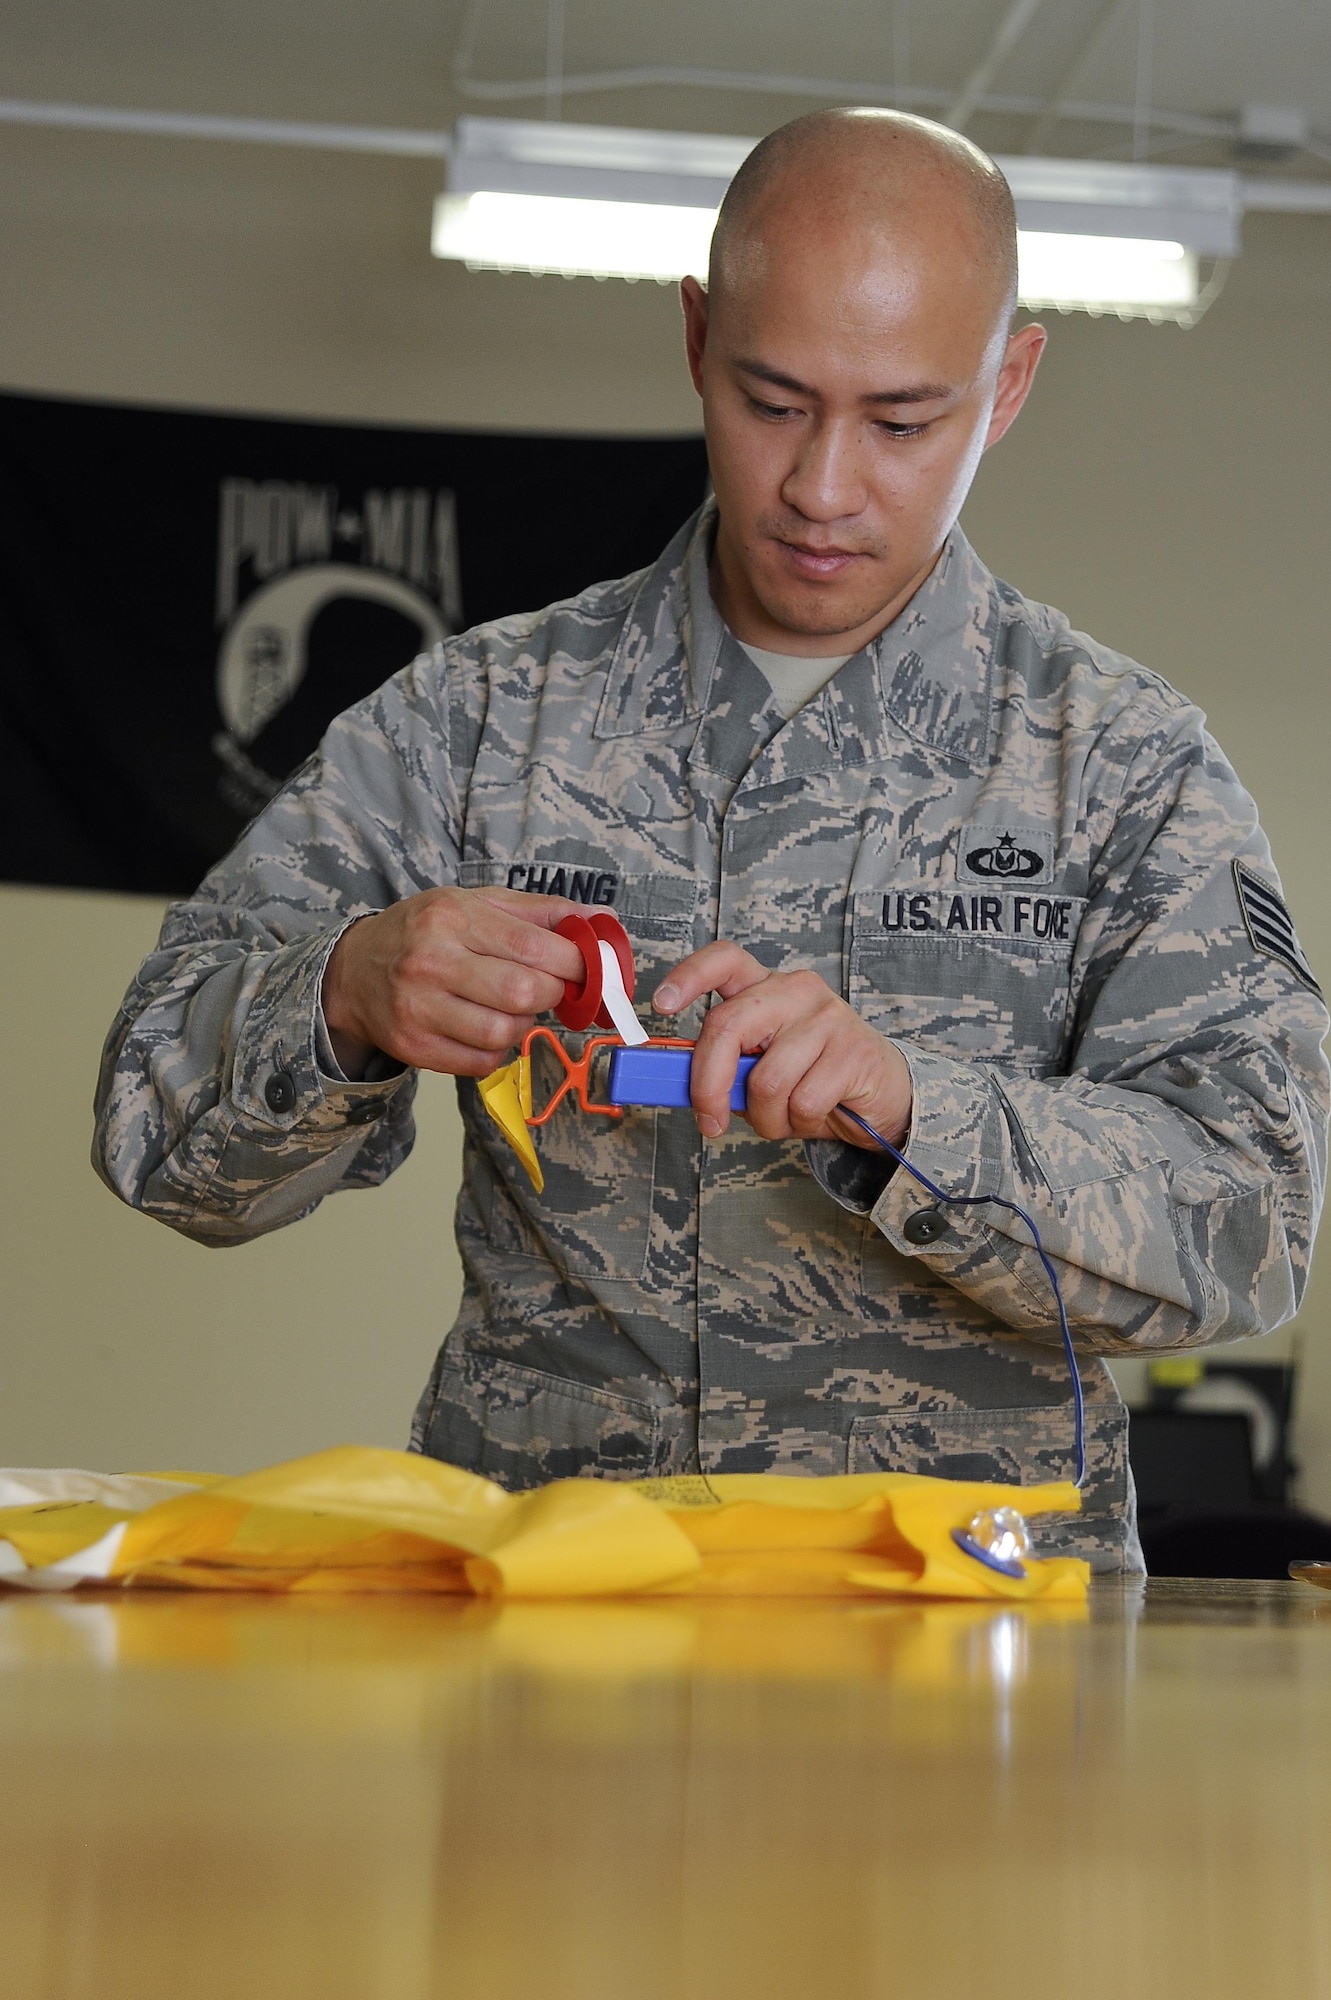 Staff Sgt. Leader Chang, an aircrew flight equipment (AFE) technician with the 6th Operations Support Squadron, inspects  aircraft life vests to ensure mission readiness at MacDill Air Force Base, Fla., Nov. 2, 2016. The flightline section of AFE is responsible for the equipment aboard the aircraft. (U.S. Air Force photo by Airman 1st Class Mariette Adams)